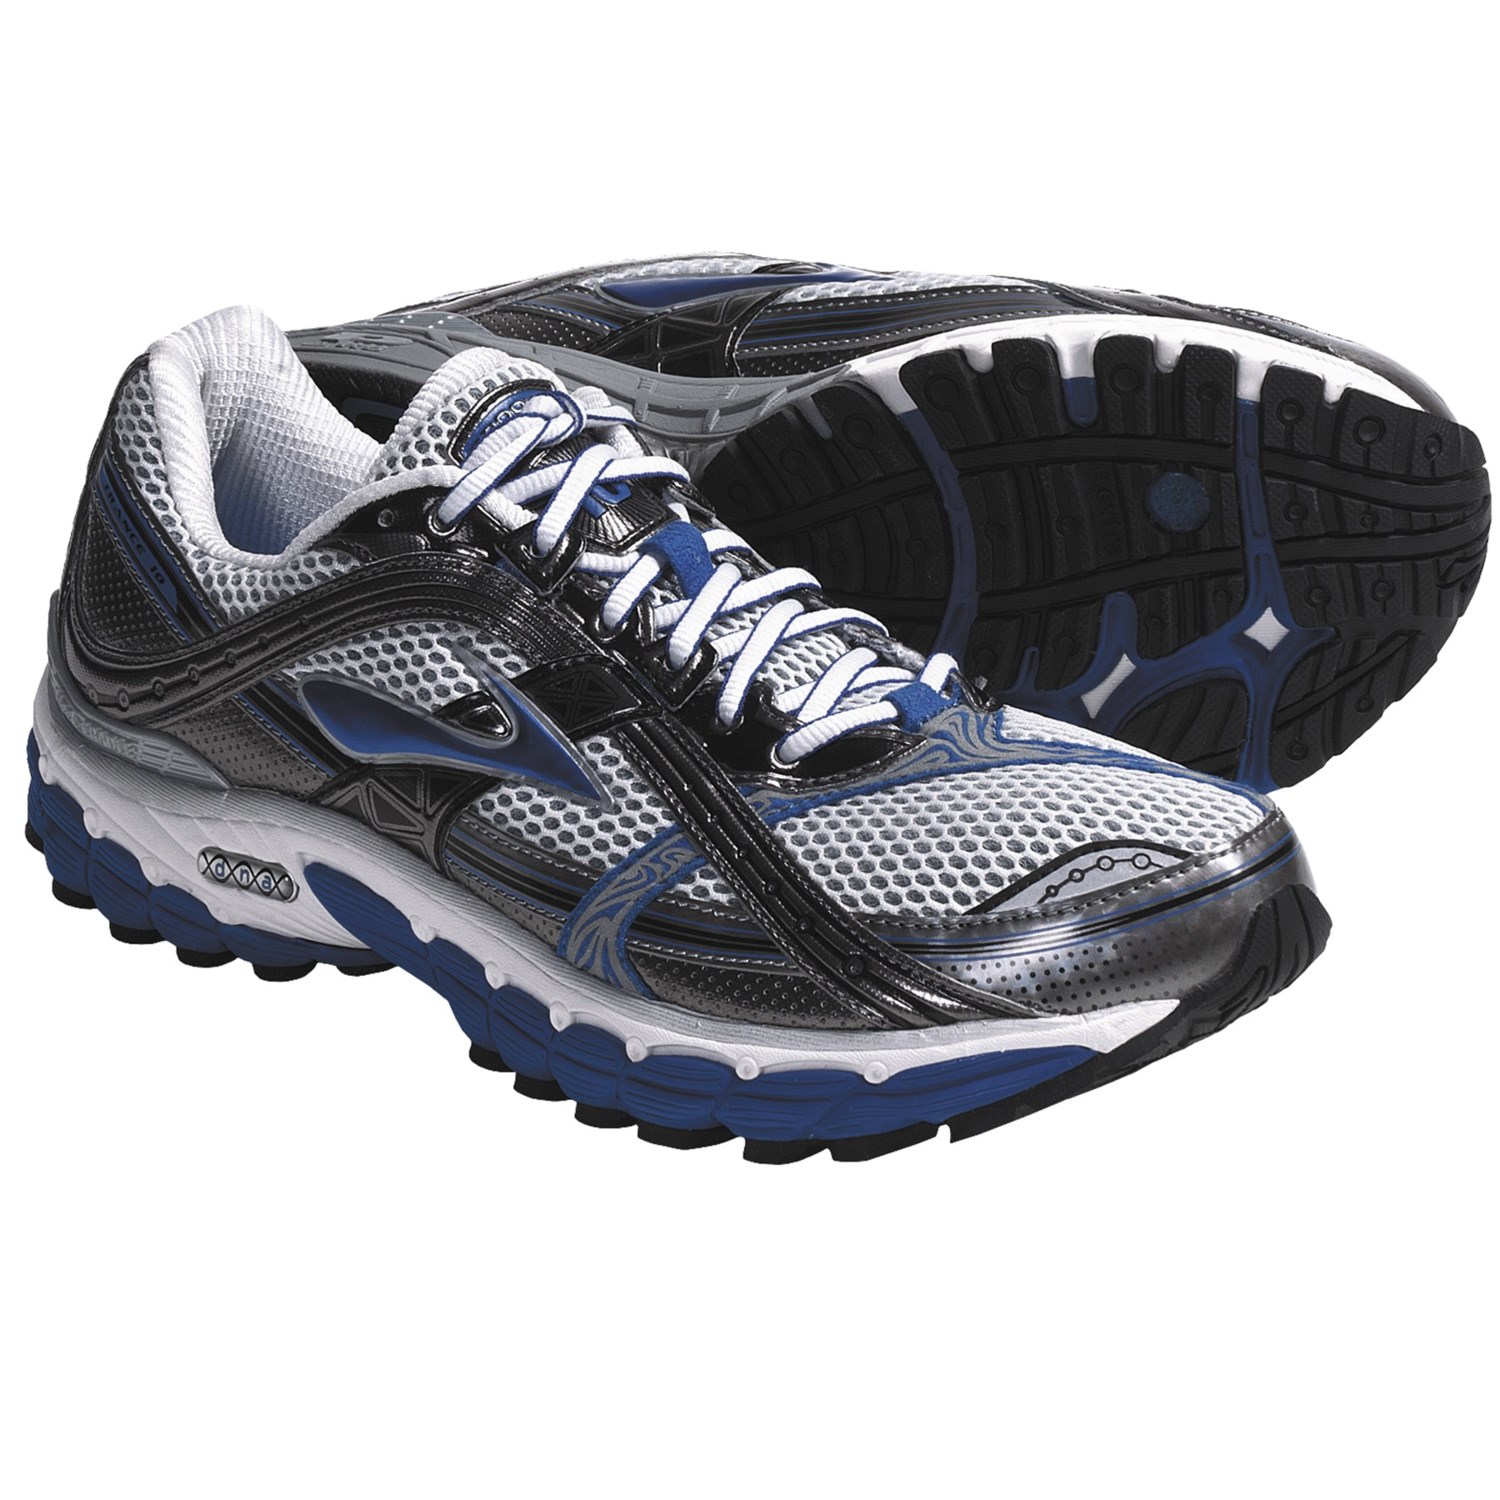 Download this Brooks Trance Running Shoes For Men Bright Navy Metallic picture